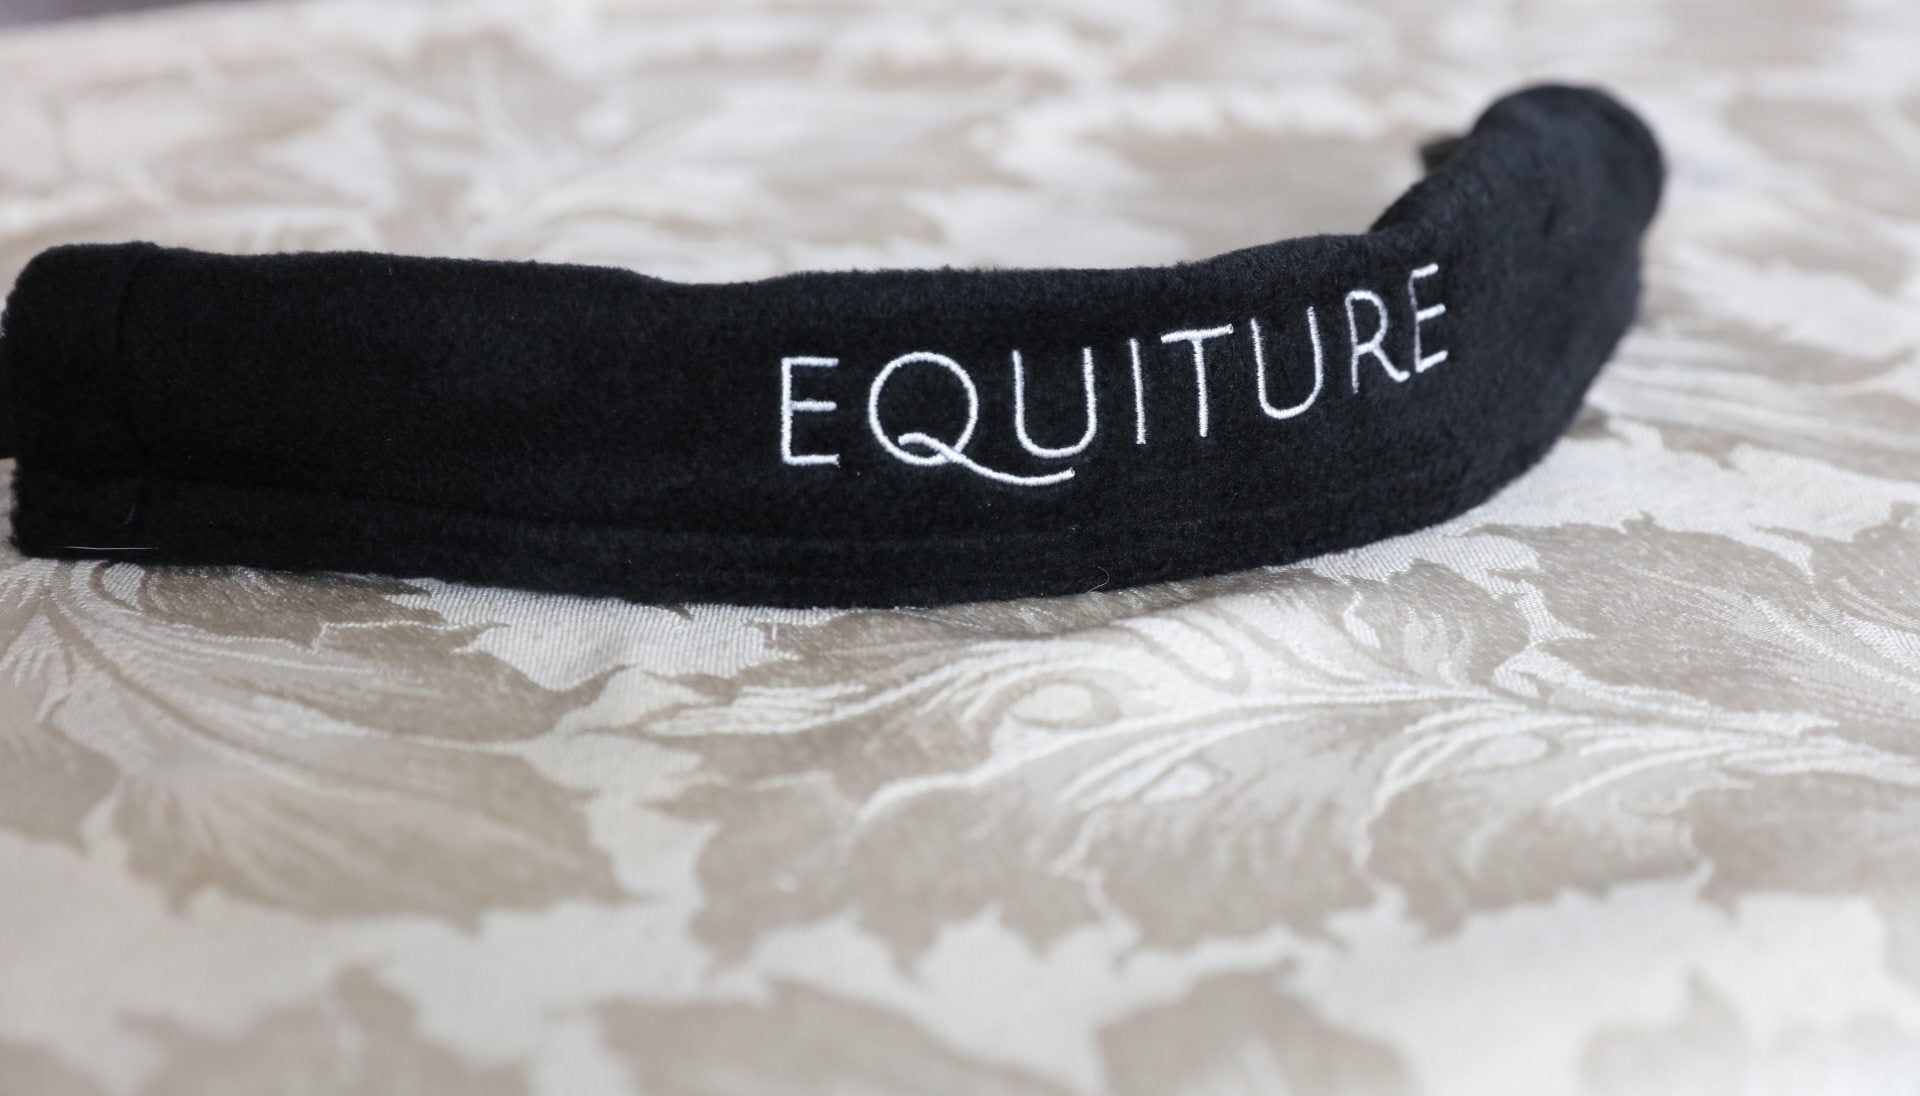 Equiture Jet and clear megabling curve browband